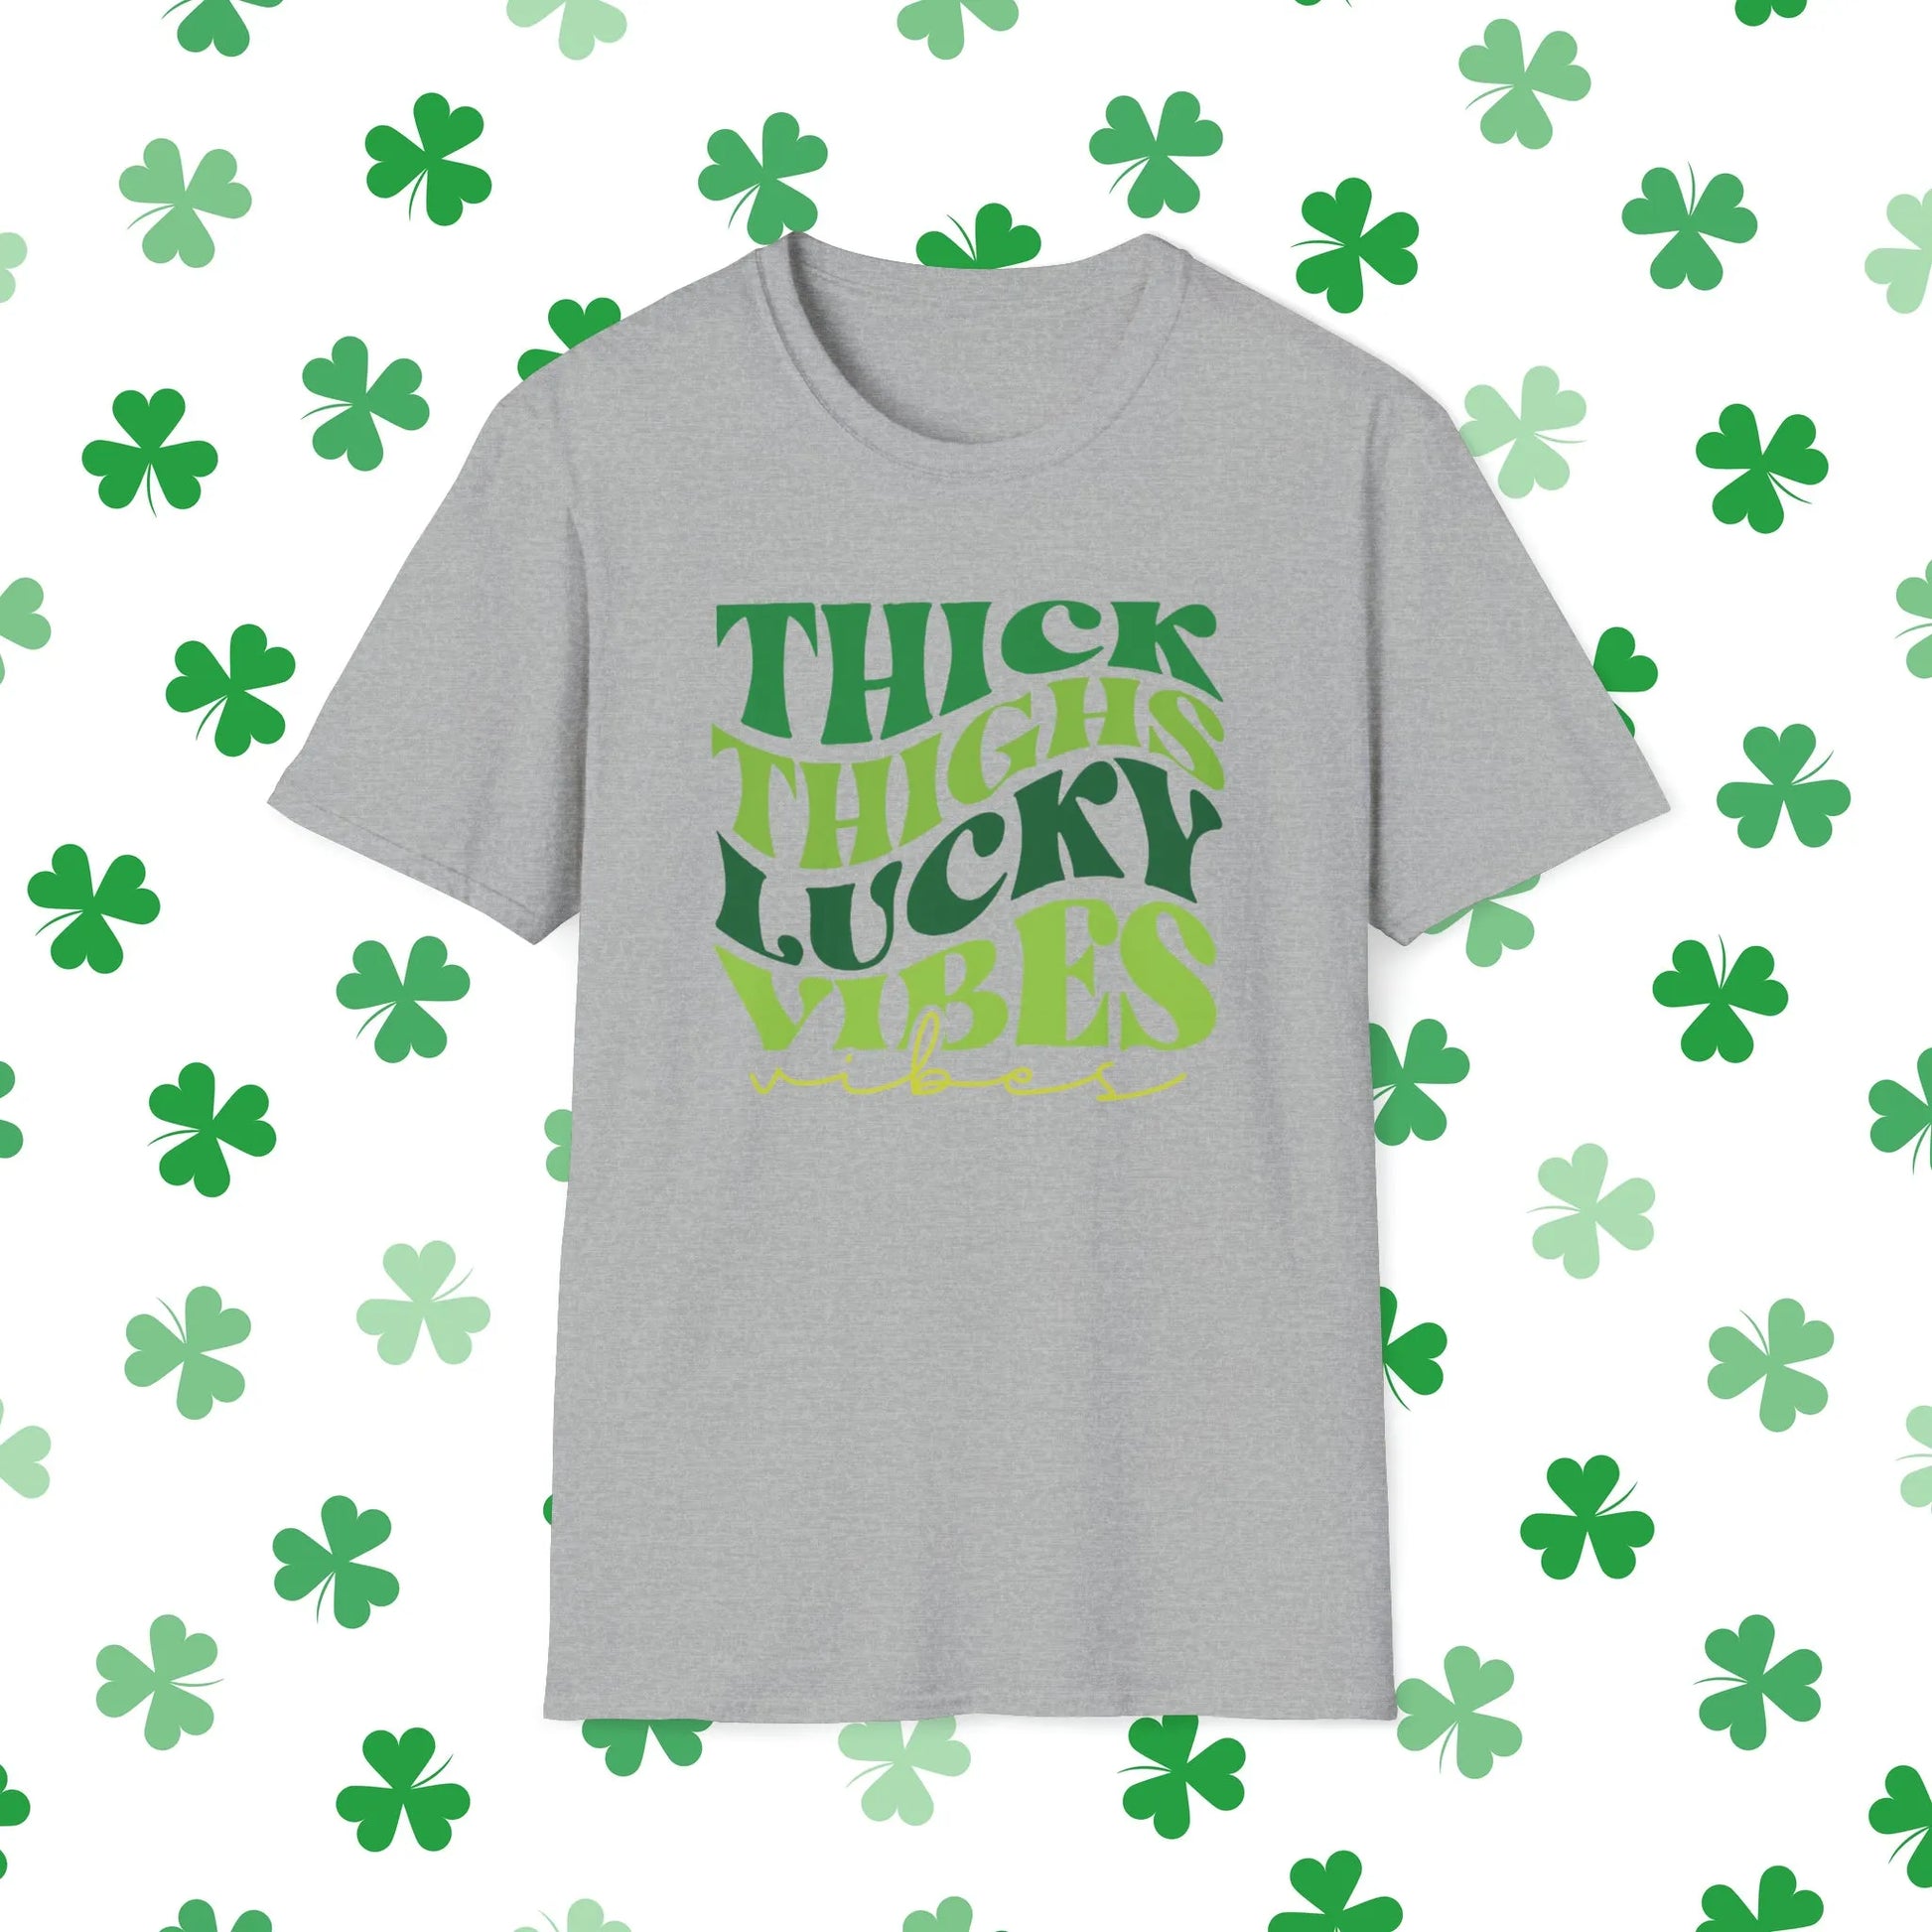 Thick Thighs Lucky Vibes Retro-Style St. Patrick's Day T-Shirt - Comfort & Charm - Thick Thighs Lucky Vibes St. Patrick's Day Shirt Grey